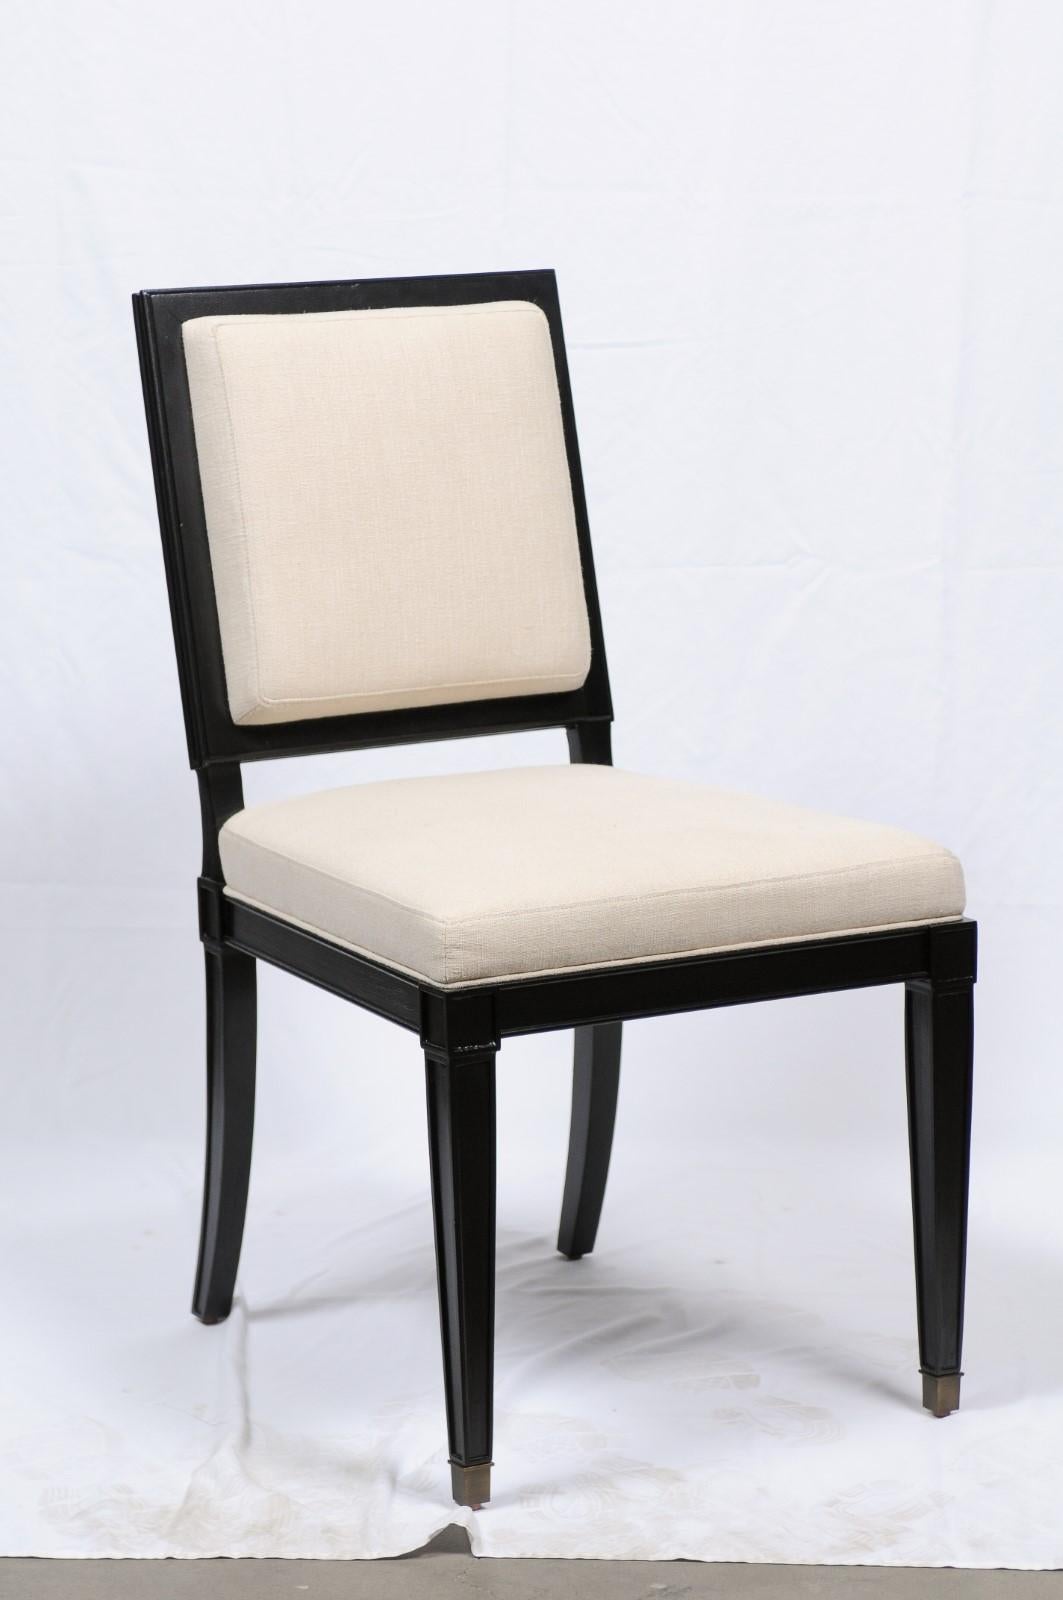 Mahogany Milling Road Windom Side Chair by Darryl Carter for Baker